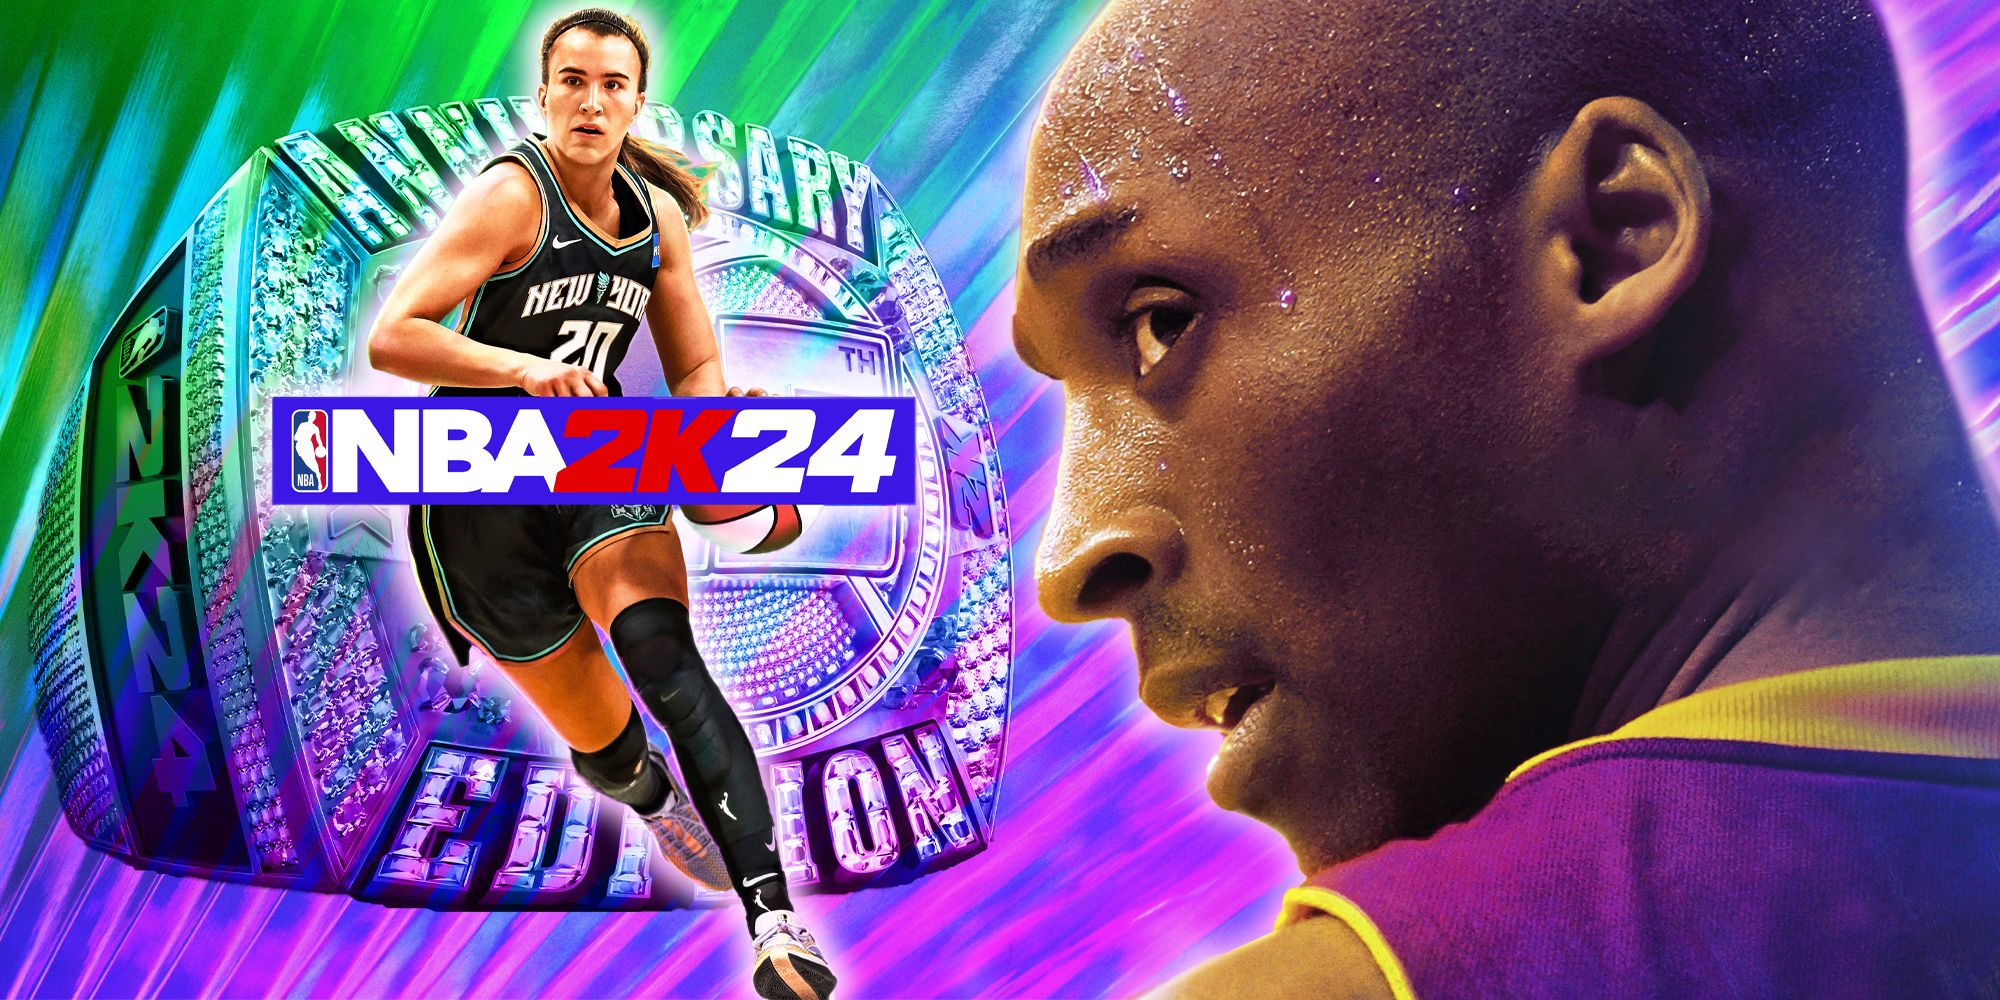 A combination of multiple 2K24 covers, with a close-up of Kobe Bryant on the left, and full-body action shot of Sabrina Ionescu on the left behind the NBA 2K24 logo and in front of a jeweled ring created for the game's Anniversary Edition.